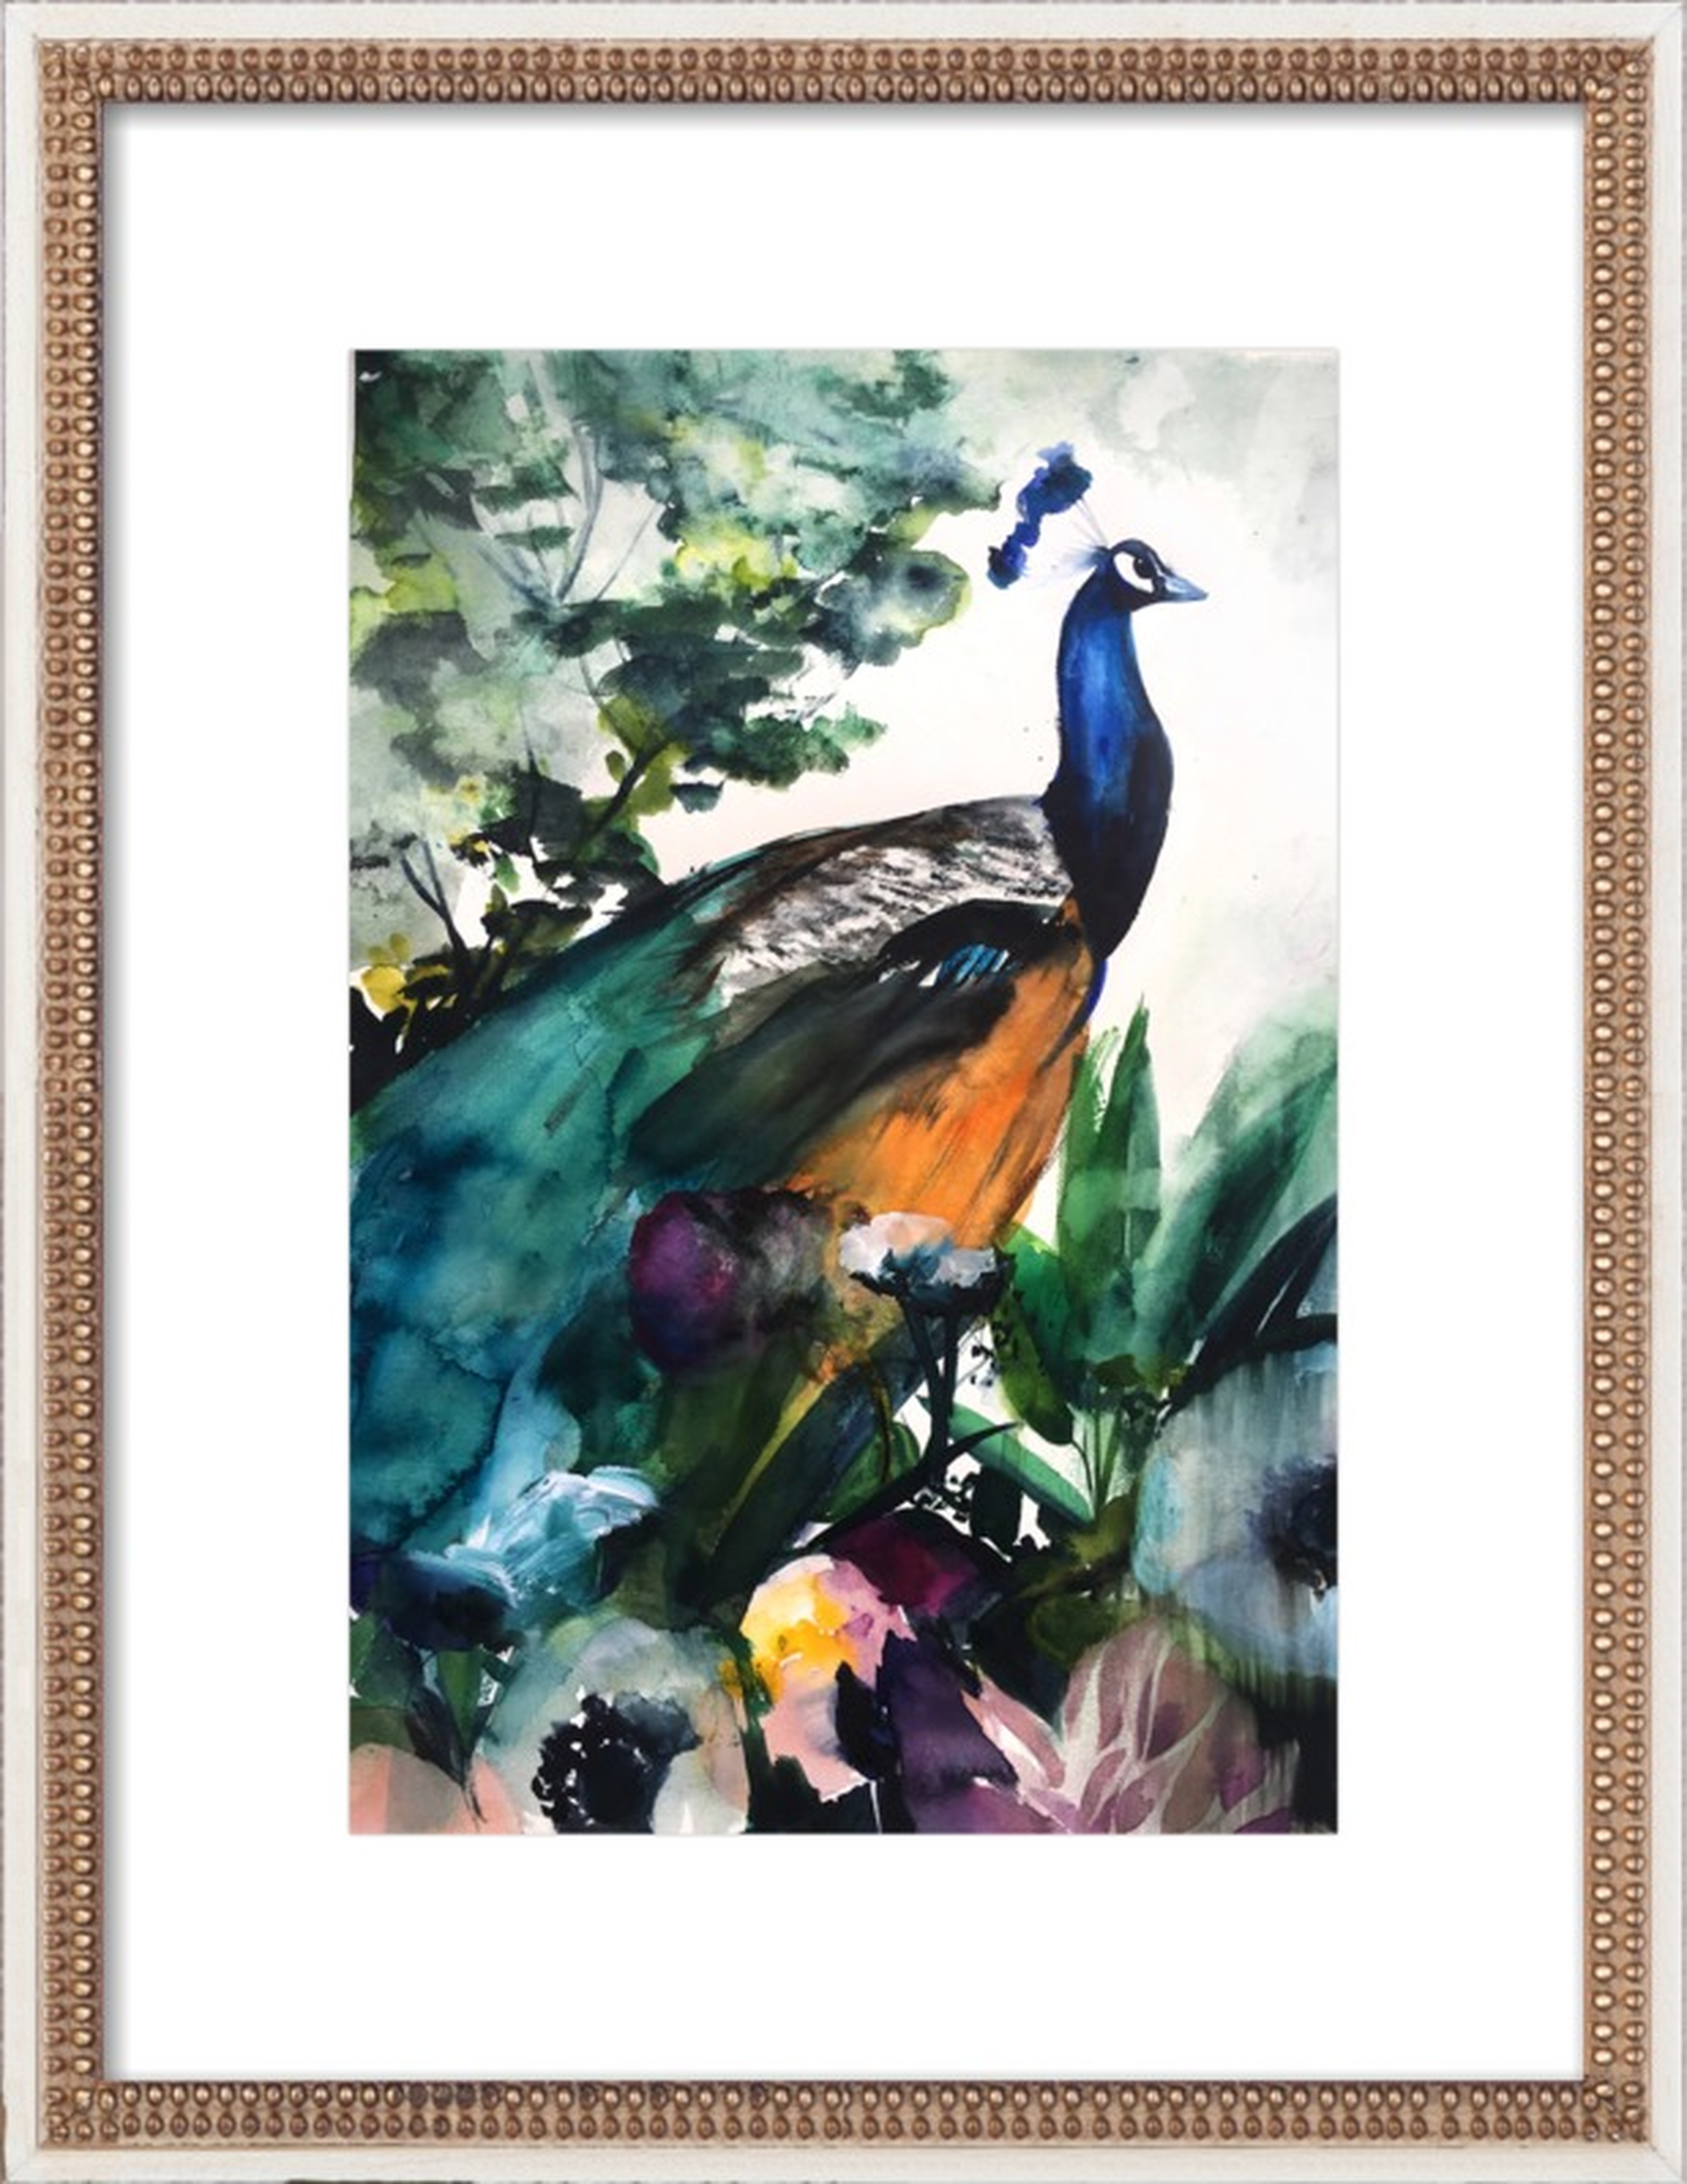 Peacock Garden - 14x20" -Distressed cream double bead wood, frame - With mat - Artfully Walls